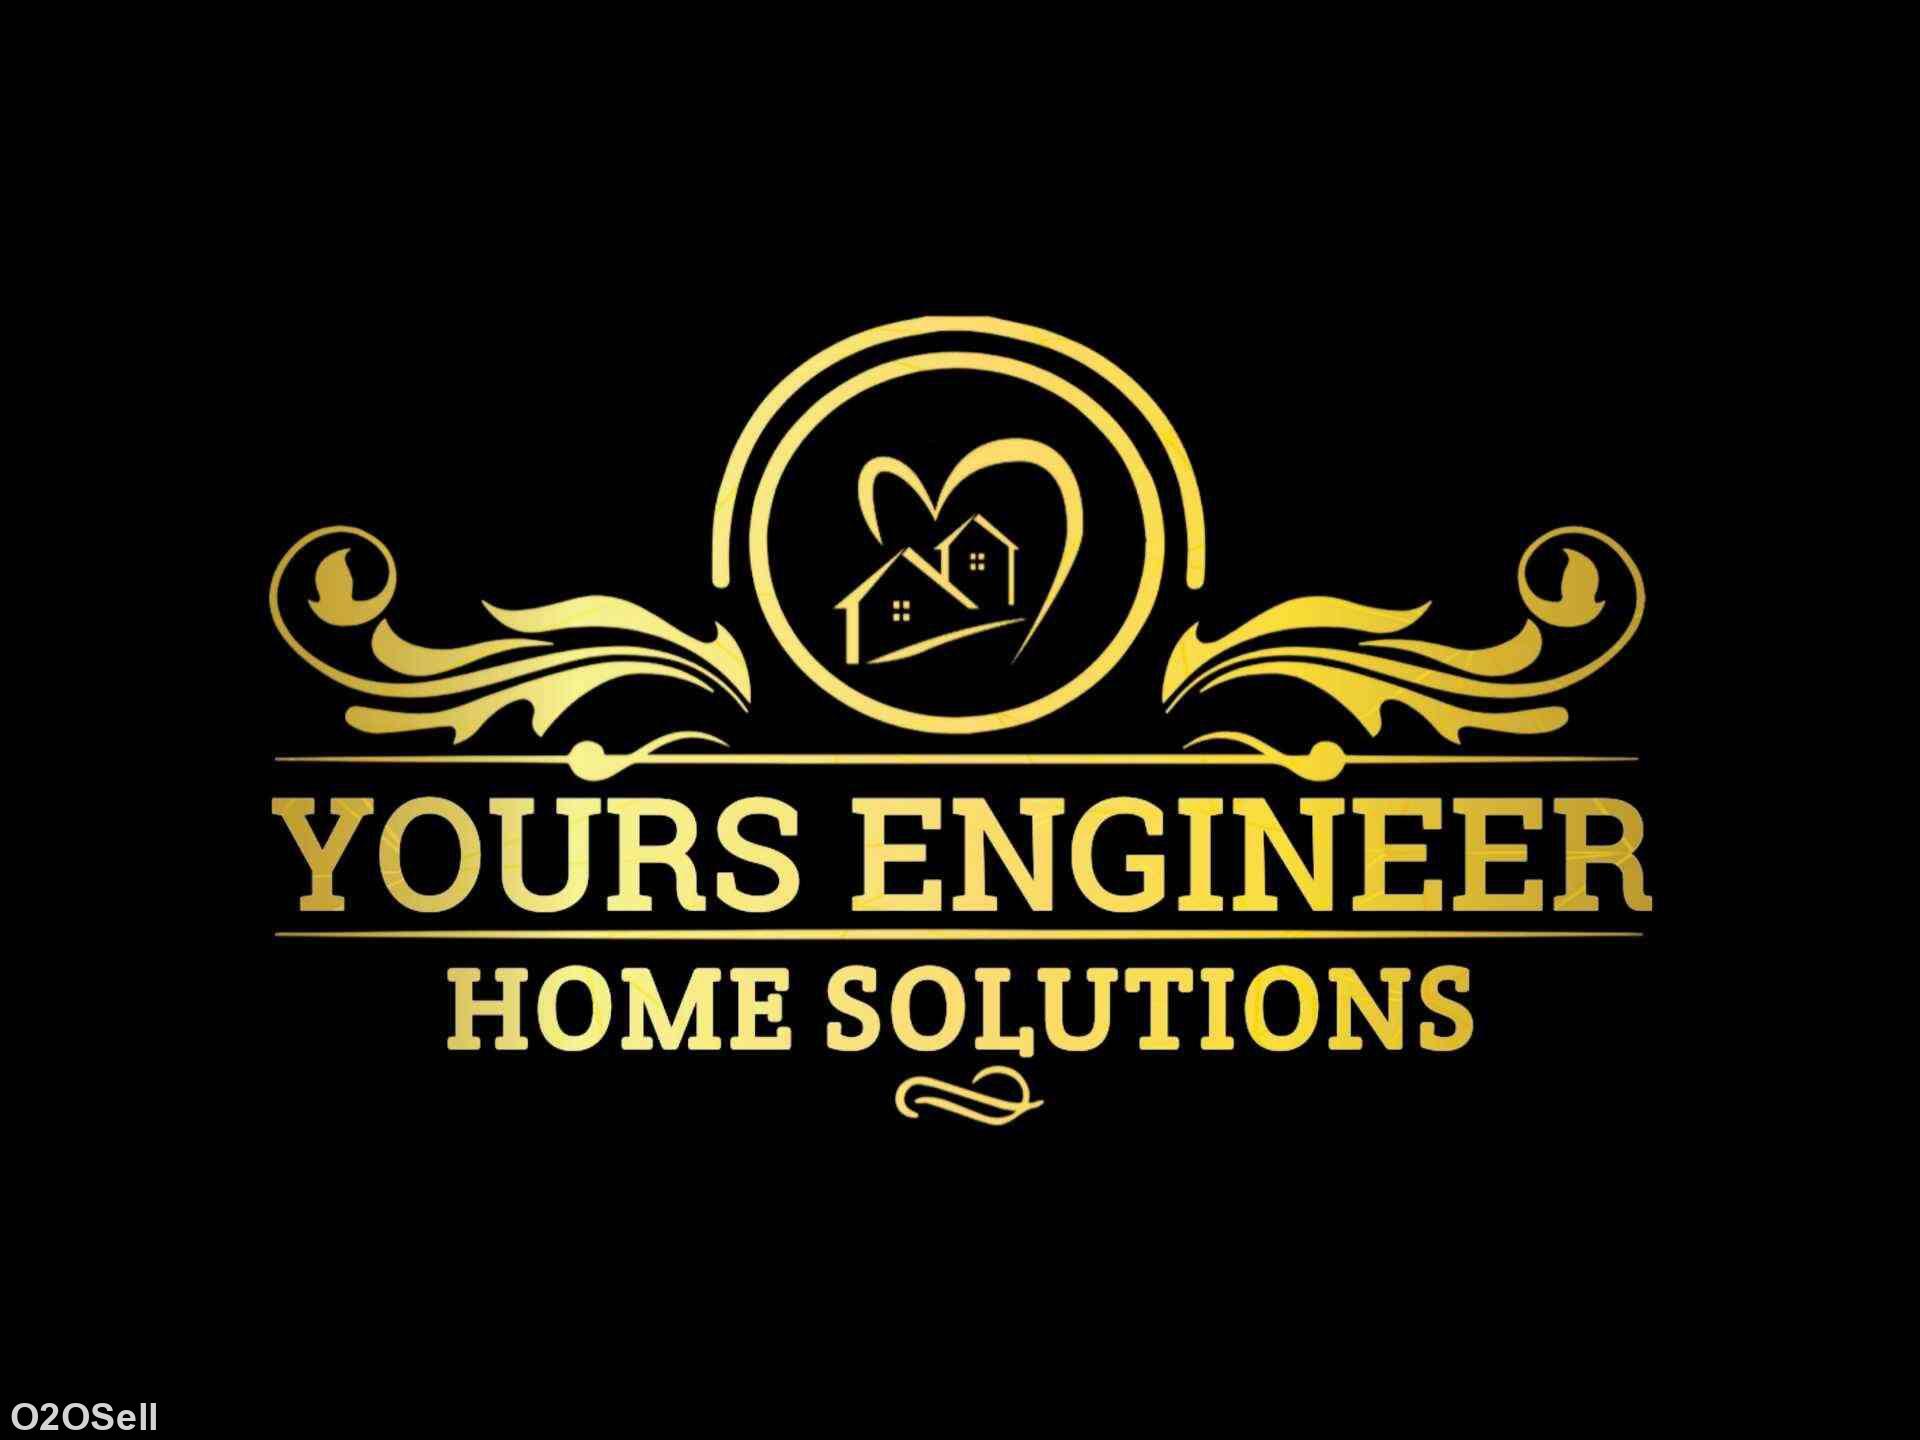 Yours Engineer Home Solution  - Profile Image